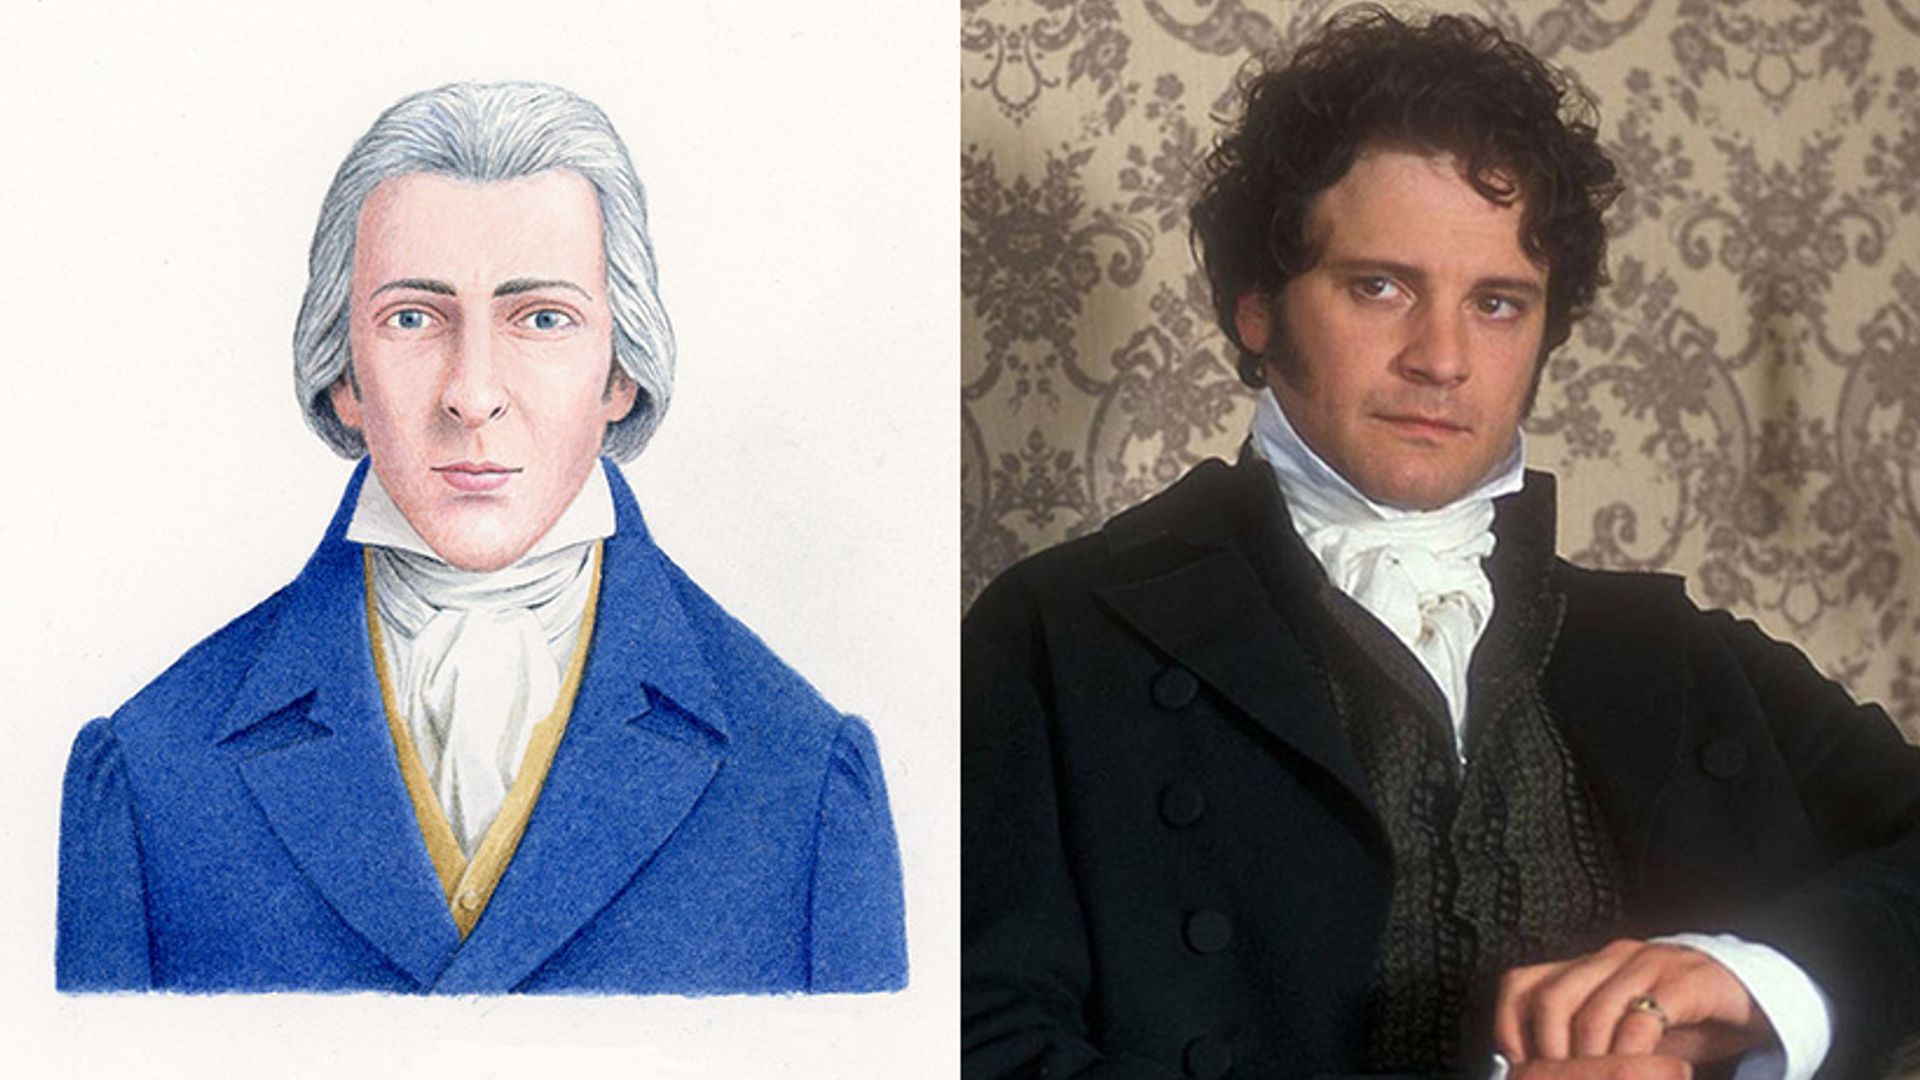 Mr Darcy: Here's what Pride and Prejudice's romantic hero should look like...